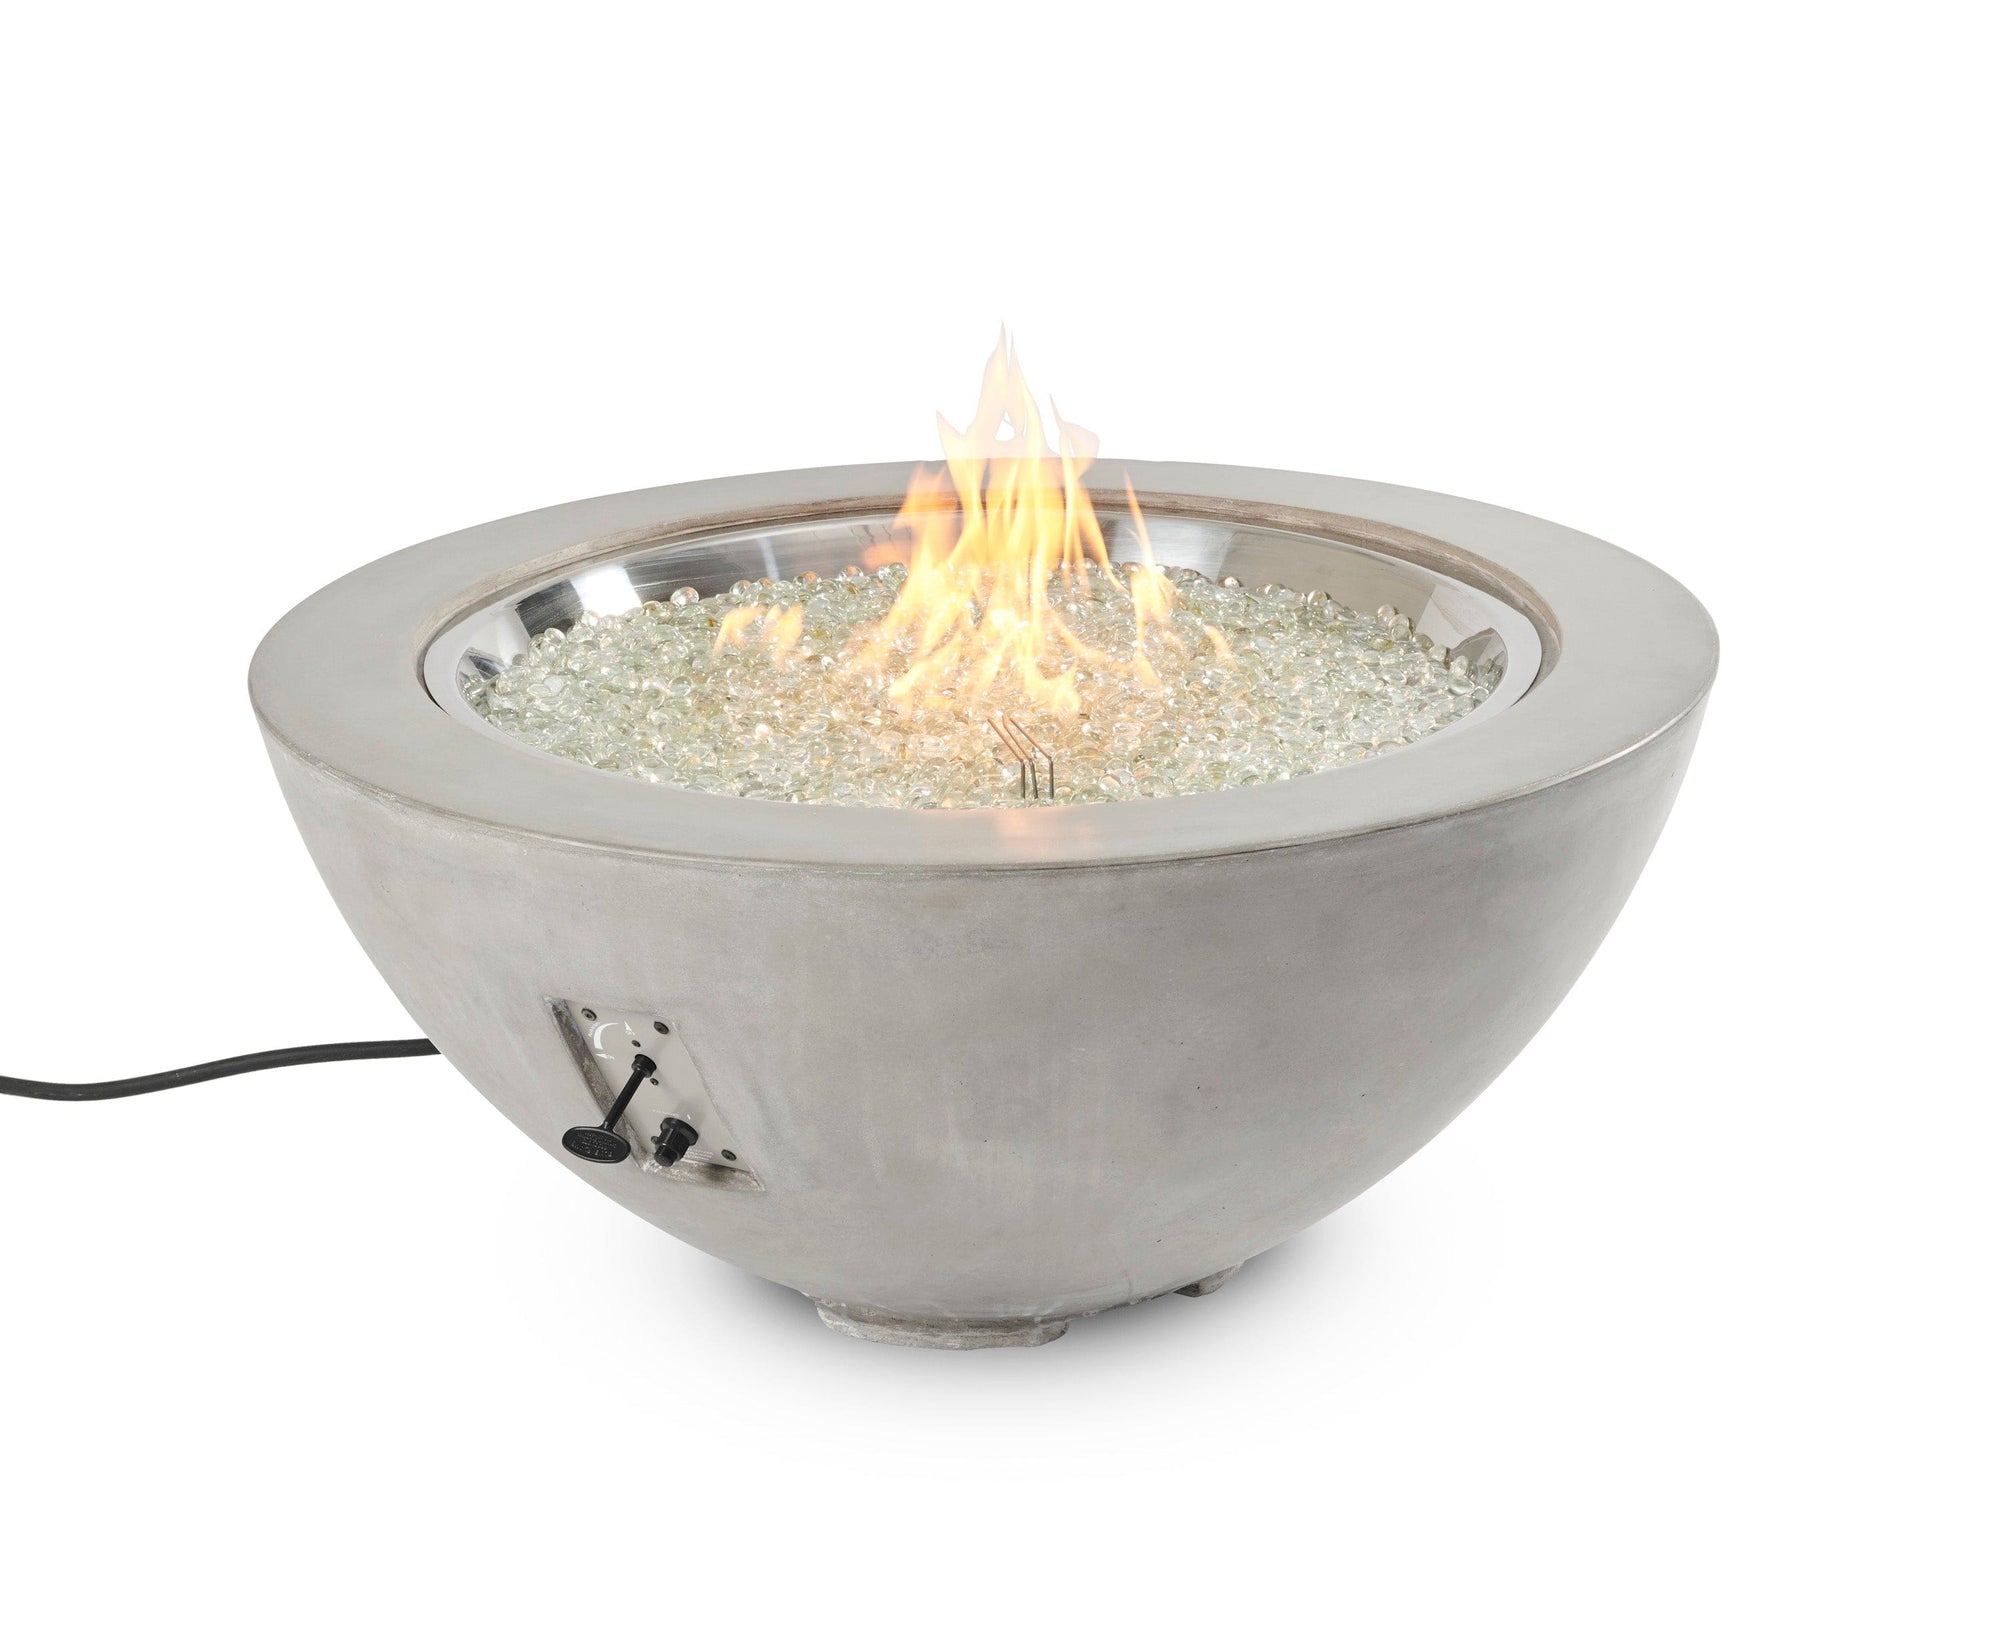 The Outdoor Great Room Fire Features The Outdoor GreatRoom Natural Grey, White, or Midnight Mist Supercas Cove 42" Round Gas Fire Pit Bowl / CV-30, CV-30MM, CV-30WT